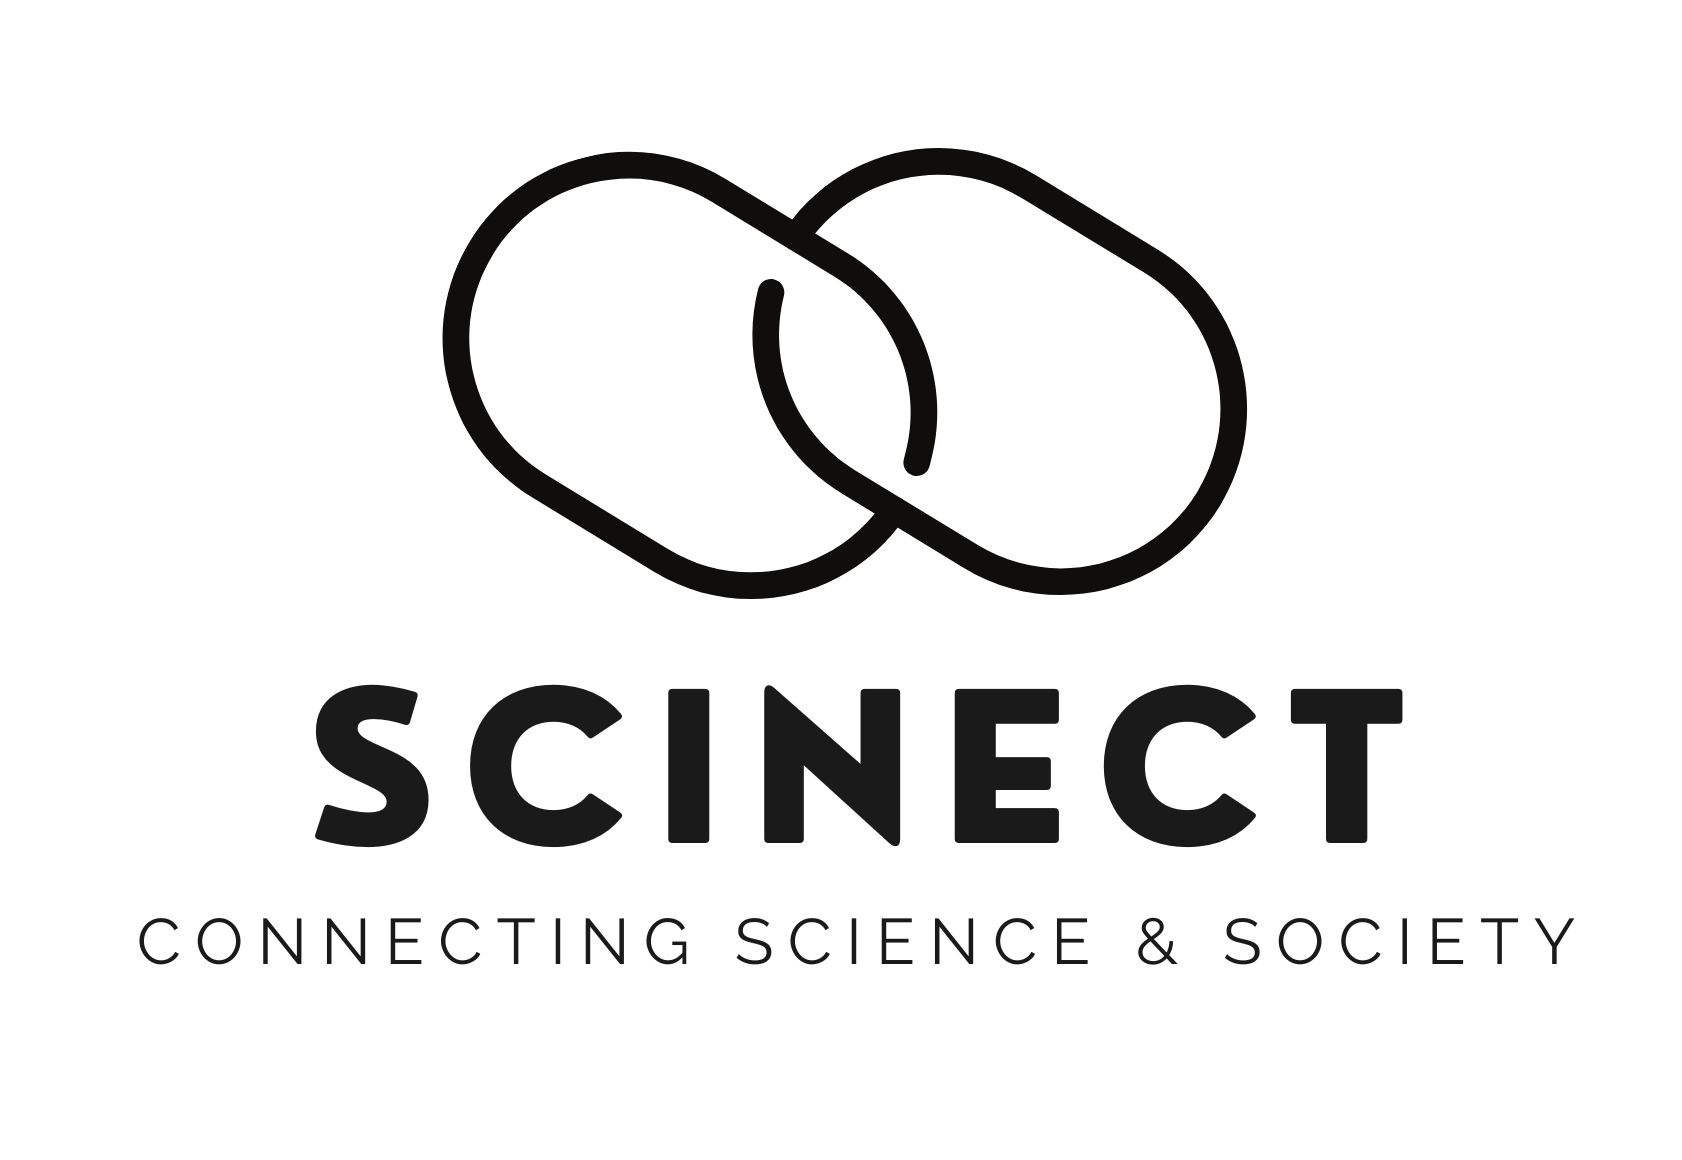 SCINECT – connecting science & society